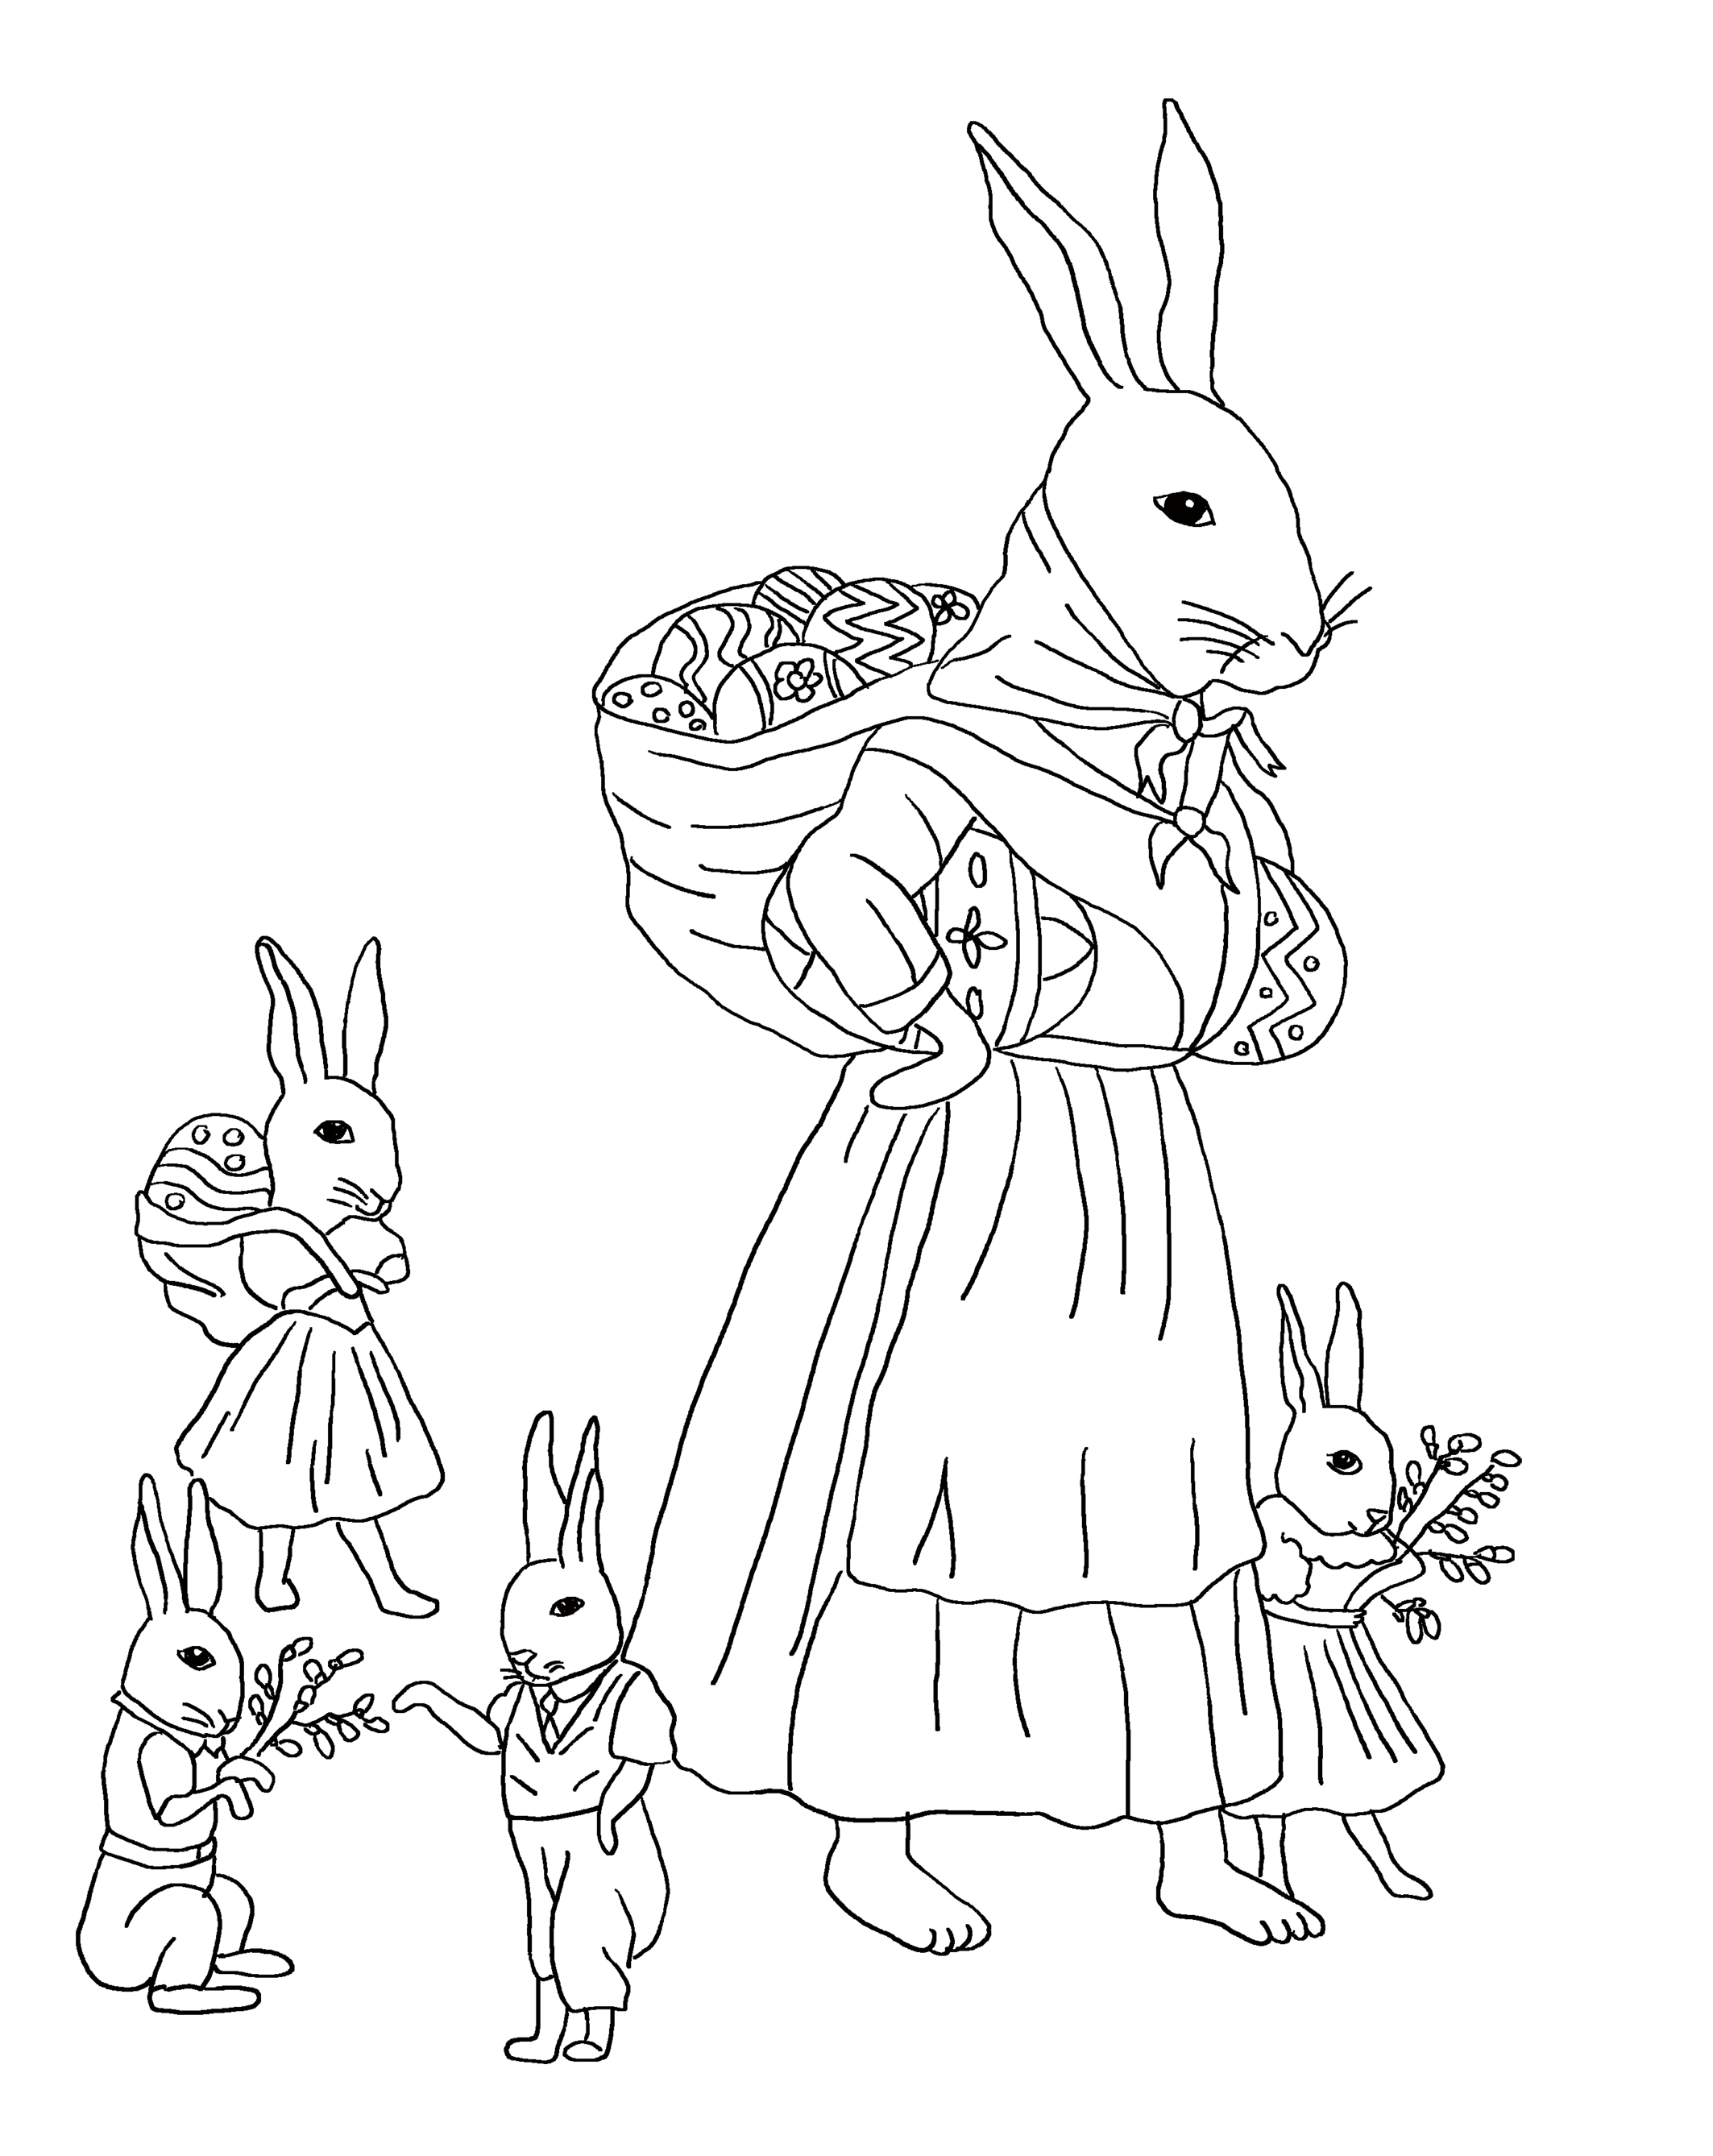 Easter coloring page with Easter bunnies with eggs and branches.